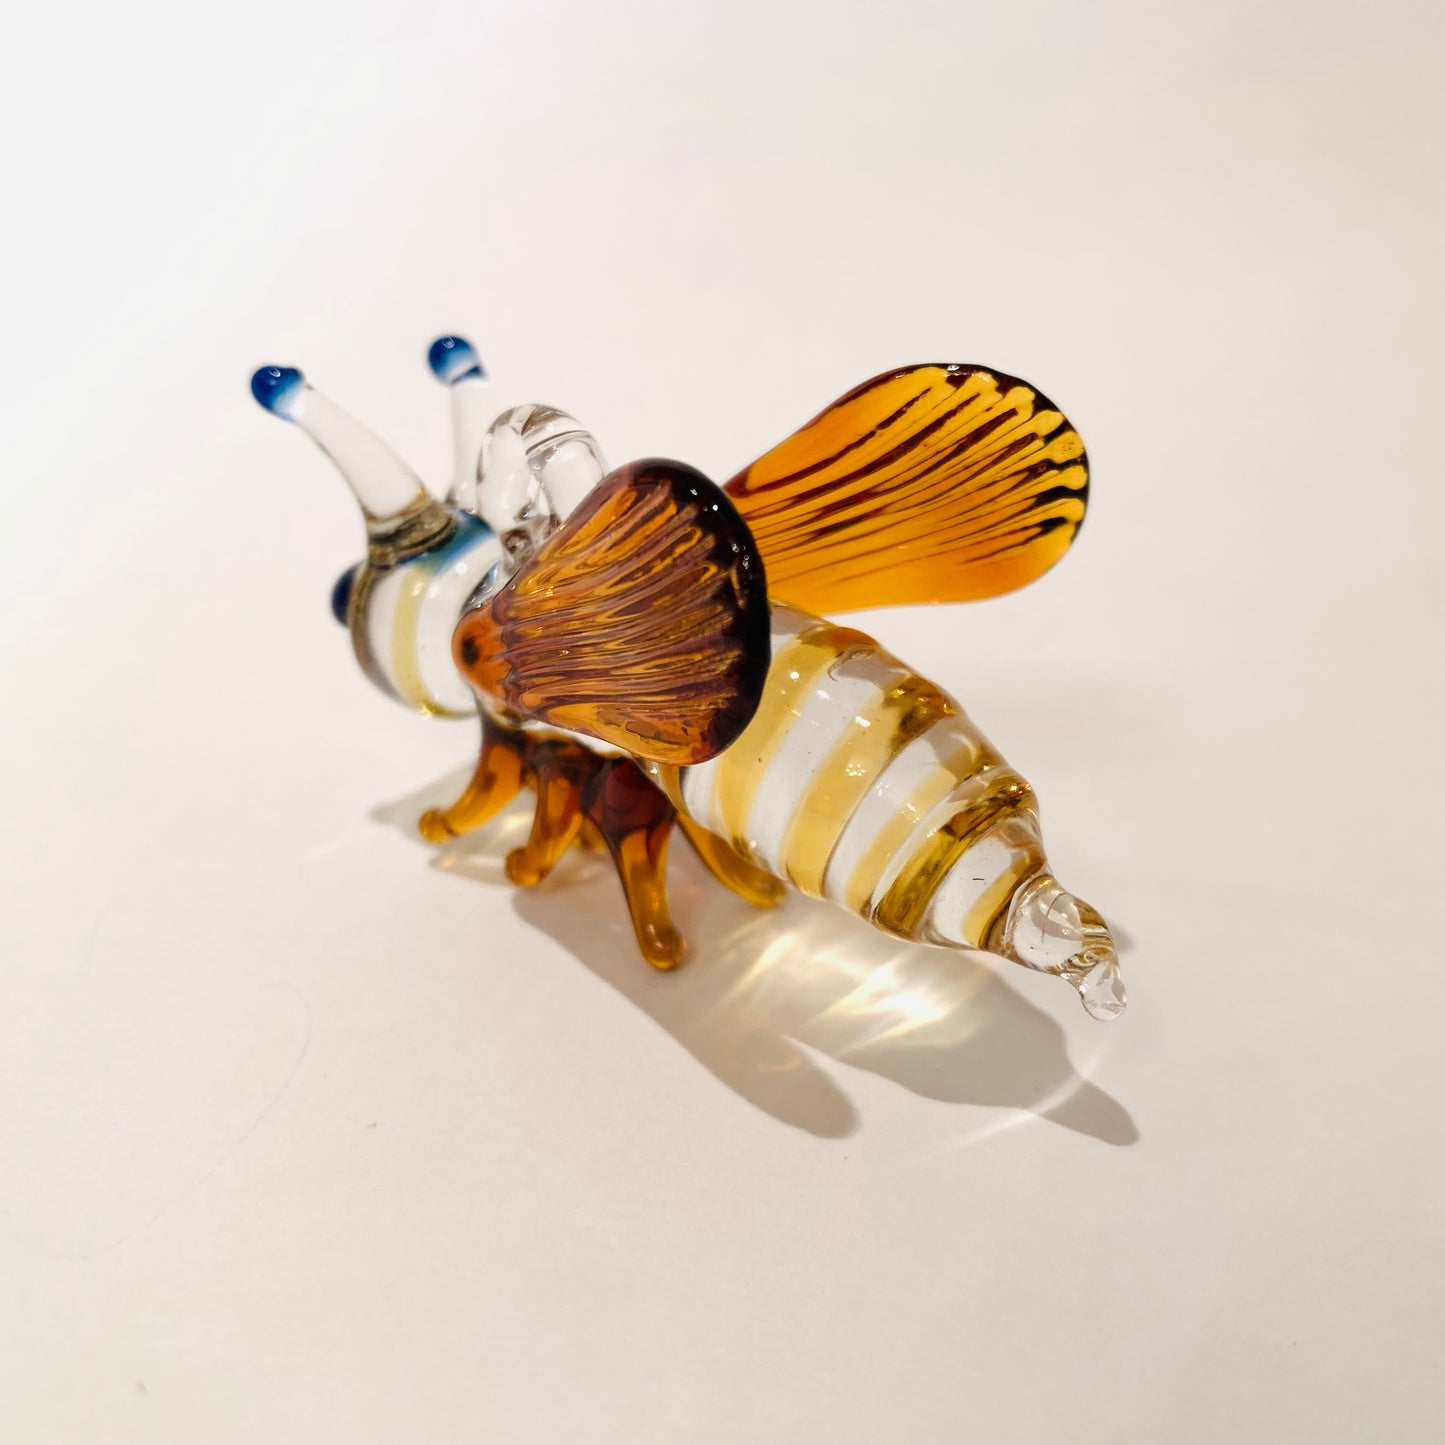 Handcrafted Glass Ornament - Bee